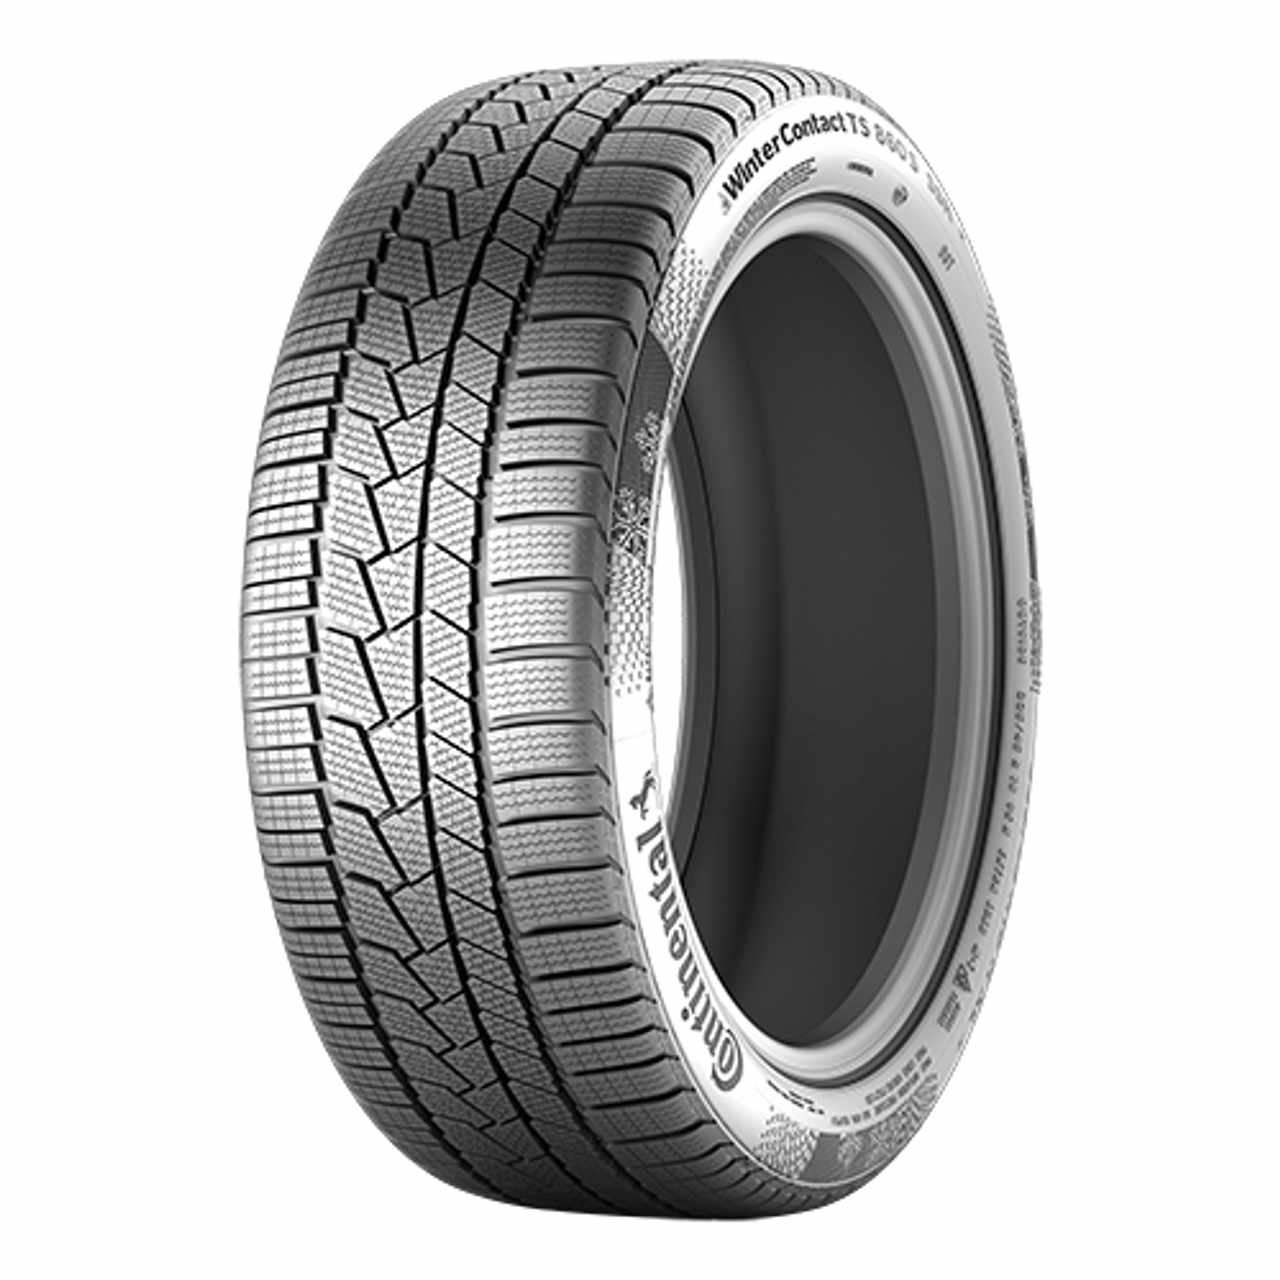 CONTINENTAL WINTERCONTACT TS 860 S (*) (EVc) SSR 205/55R16 91H BSW